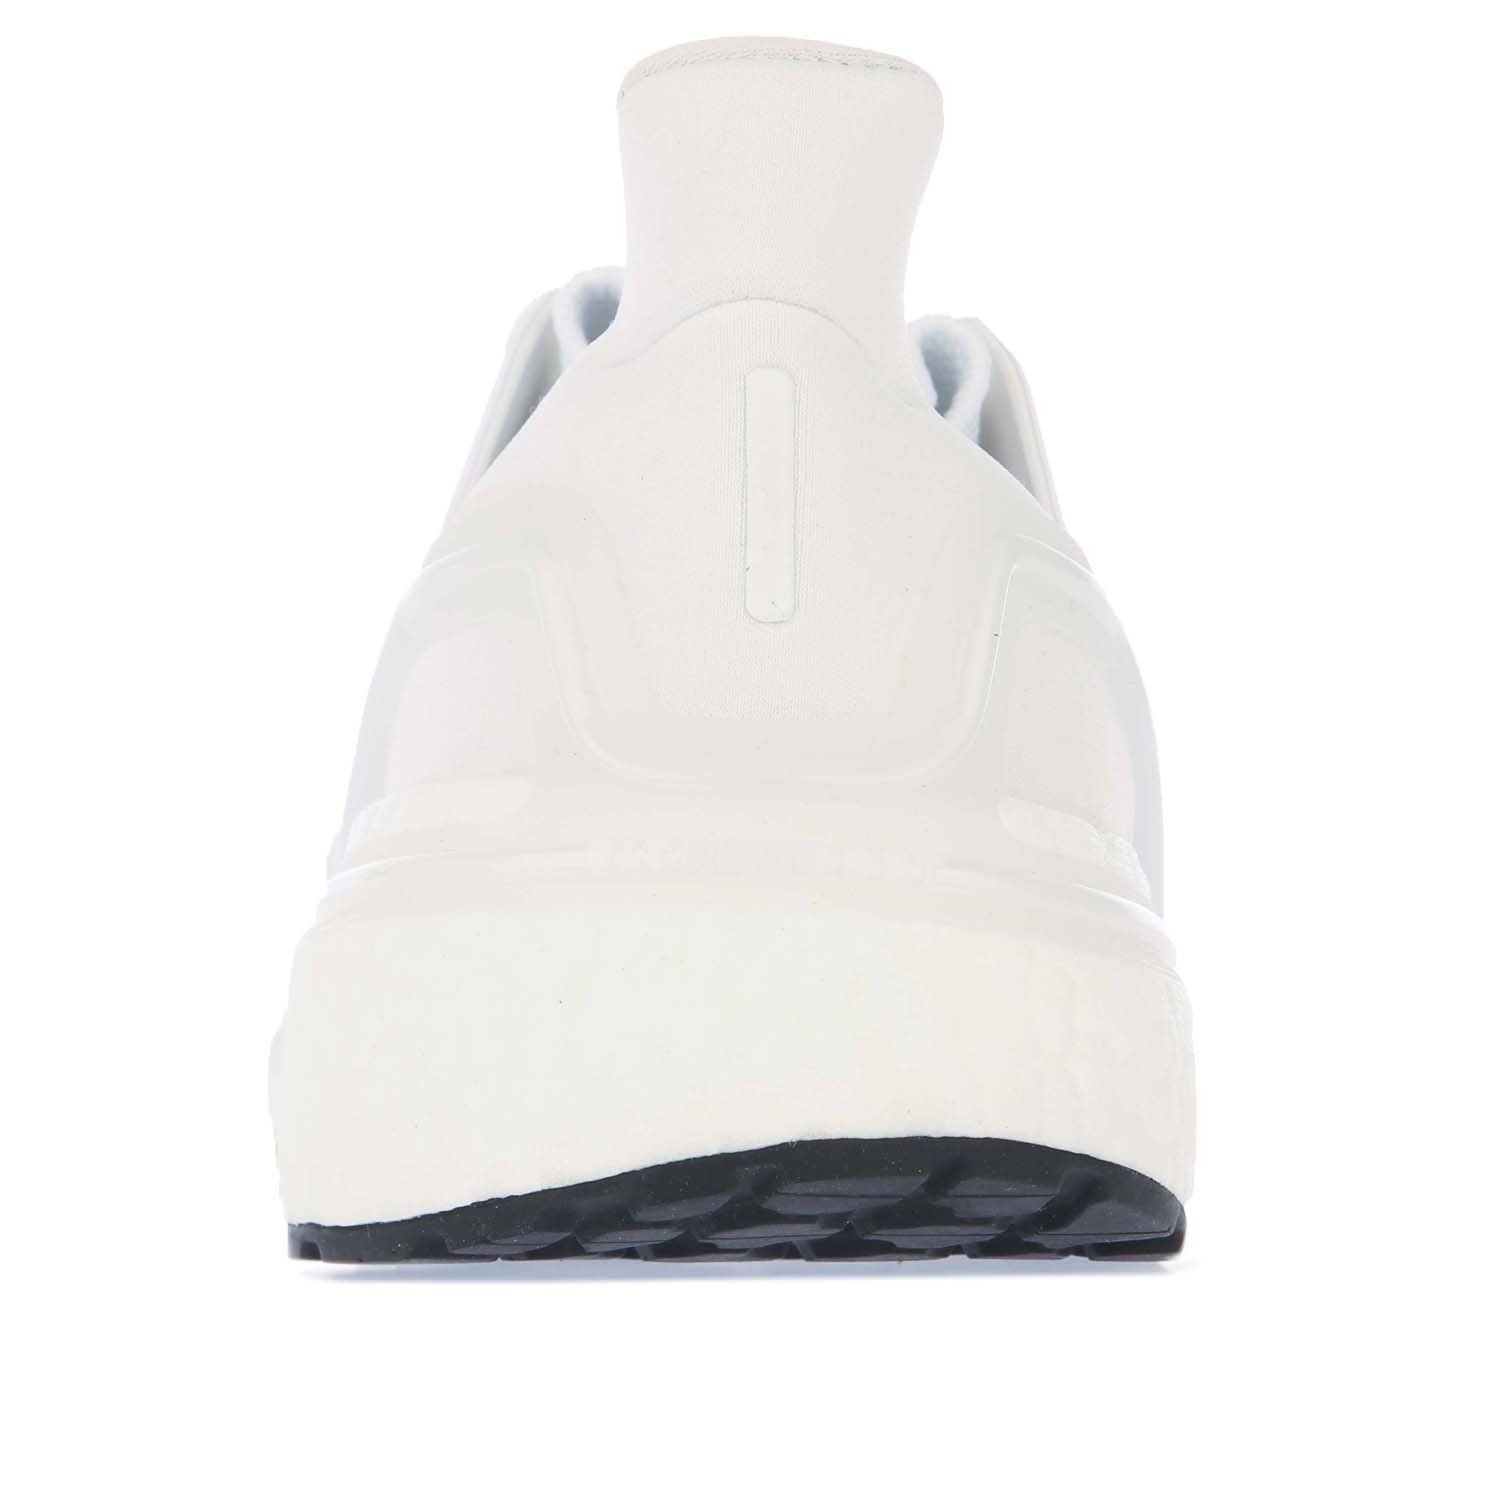 Womans adidas Ultraboost 20 Running Shoes in white.- adidas Primeknit+ textile upper.- Lace closure.- Tailored Fibre Placement locked-in fit.- High-performance running shoes.- Responsive Boost midsole.- Soft  comfortable elastane heel.- Stretchweb outsole with Continental™ Rubber.- Ref.: EG0713